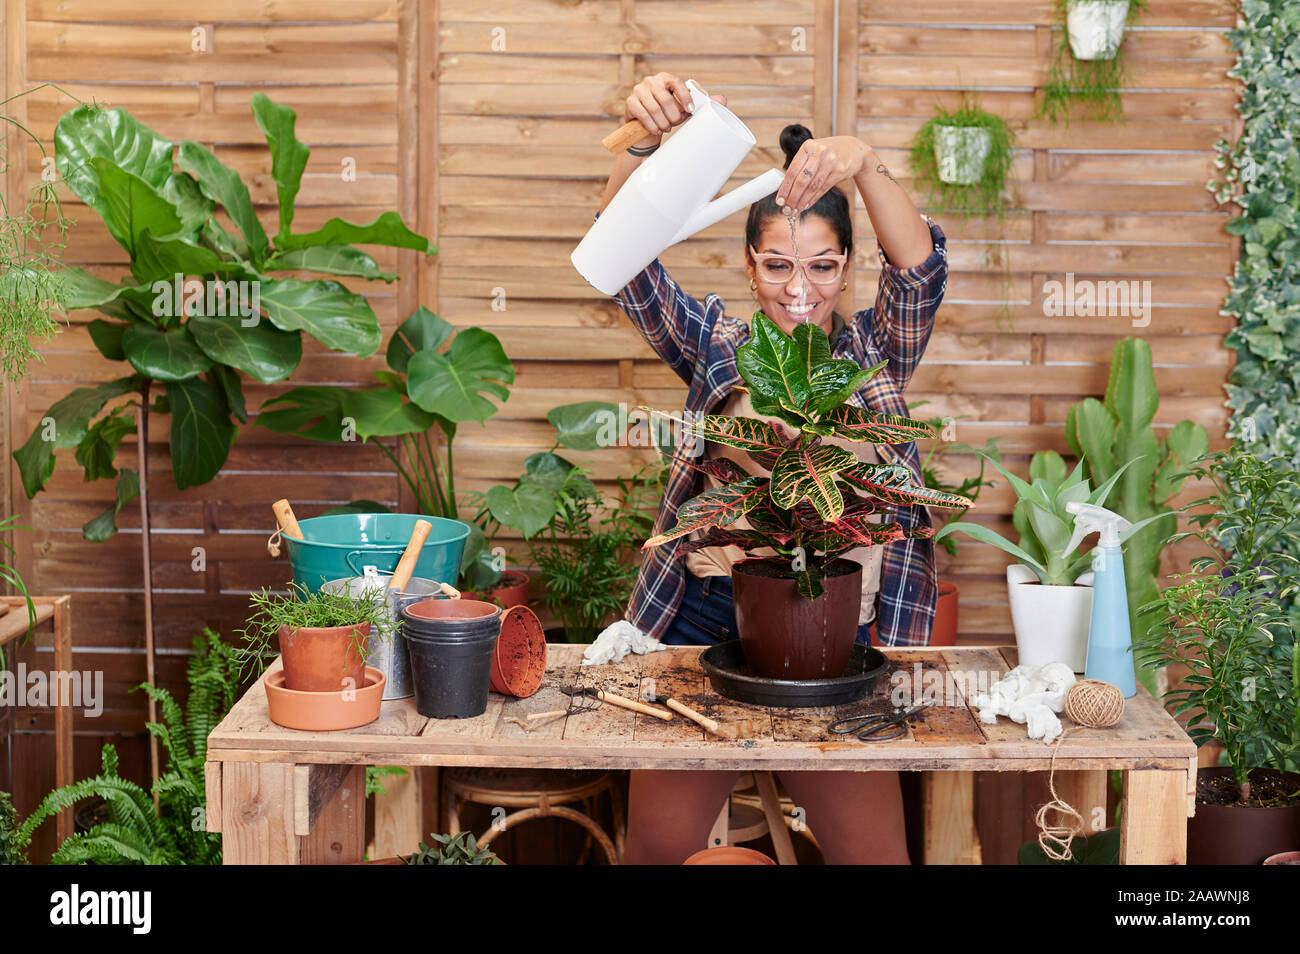 Portrait of a smiling young woman gardening on her terrace Stock Photo